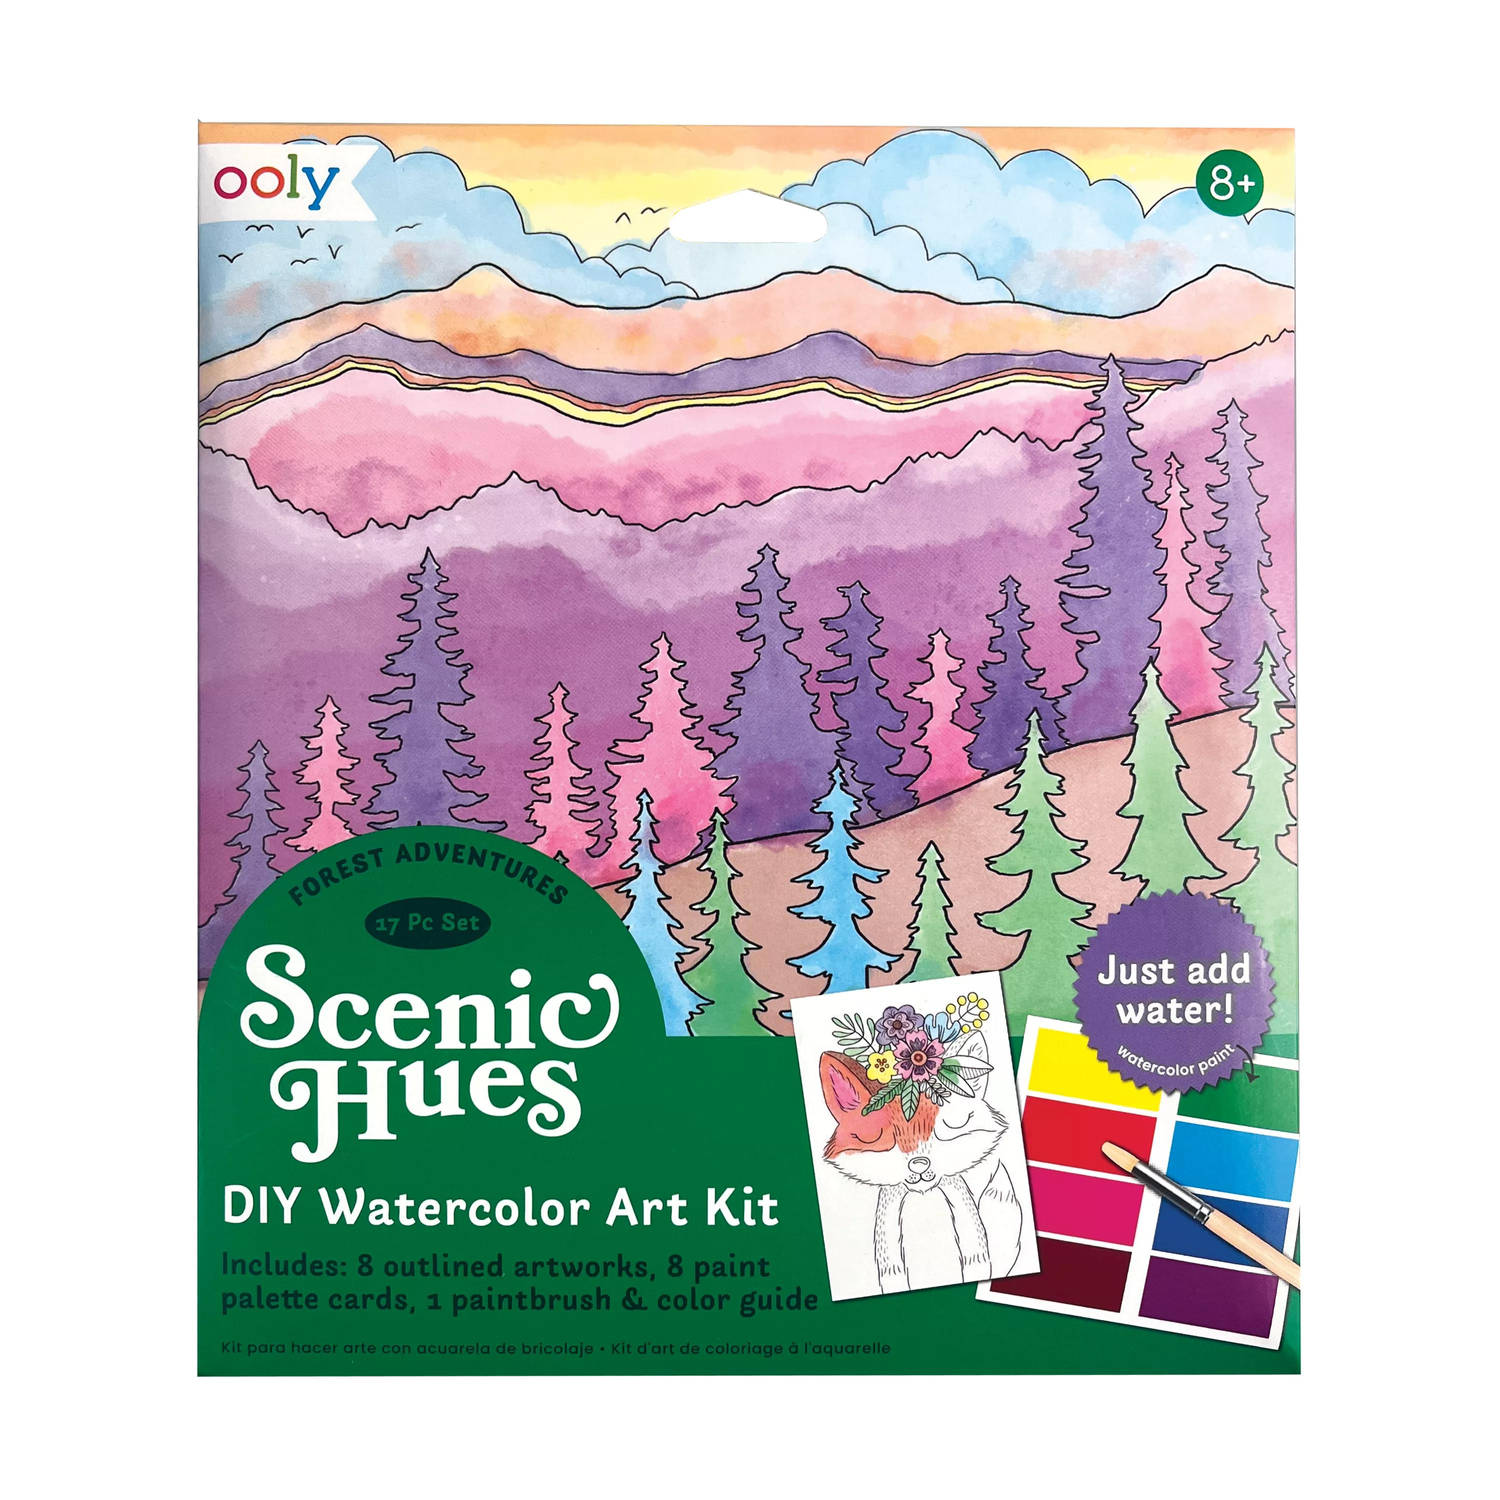 Ooly - Scenic Hues D.I.Y. Watercolor Art Kit - Forest Adventure (17 PC Set)